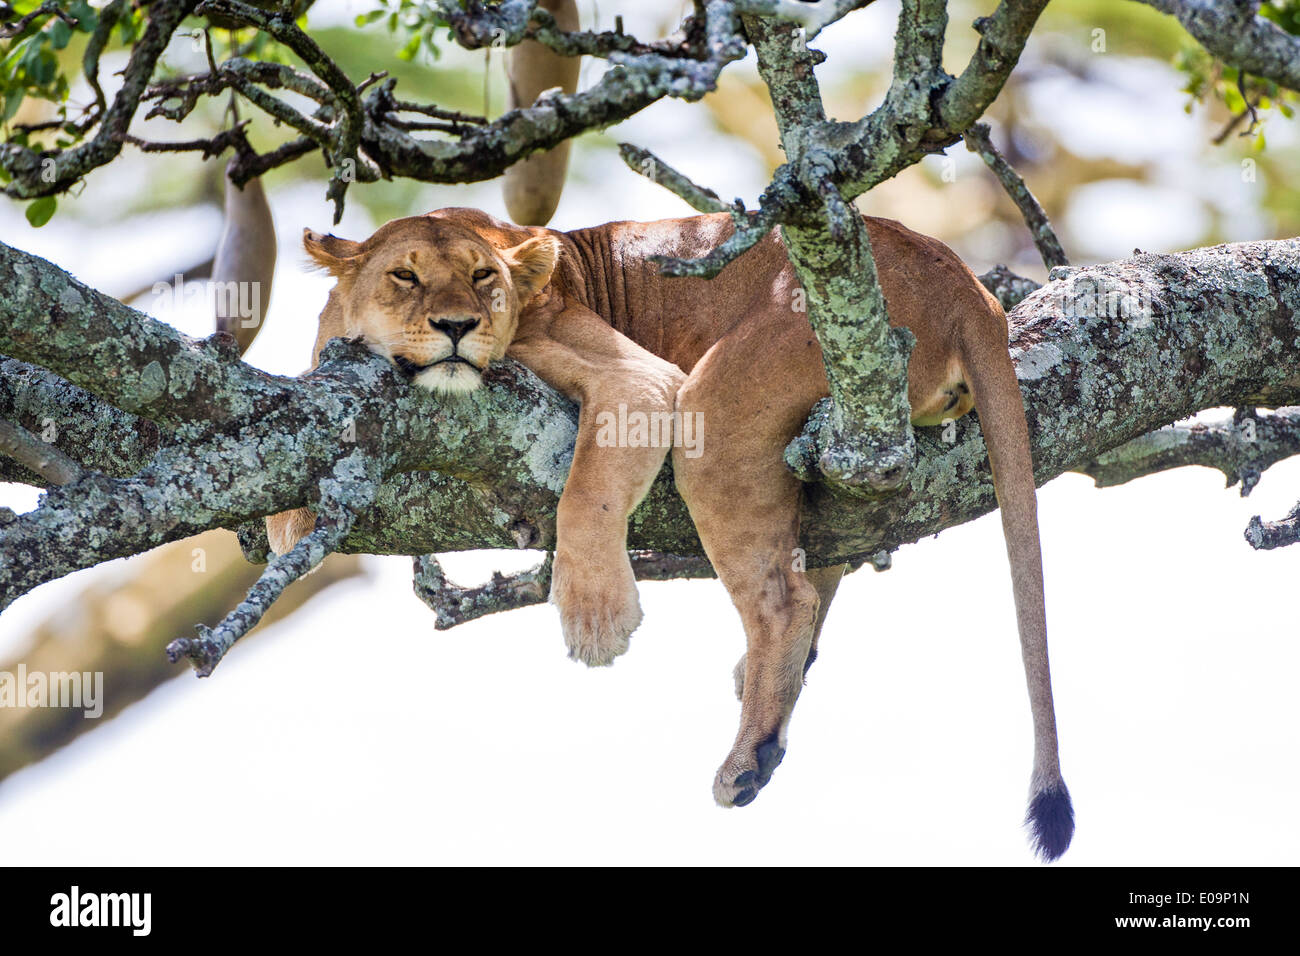 Lioness (Panthera leo) resting in a tree Photographed in Tanzania Stock Photo